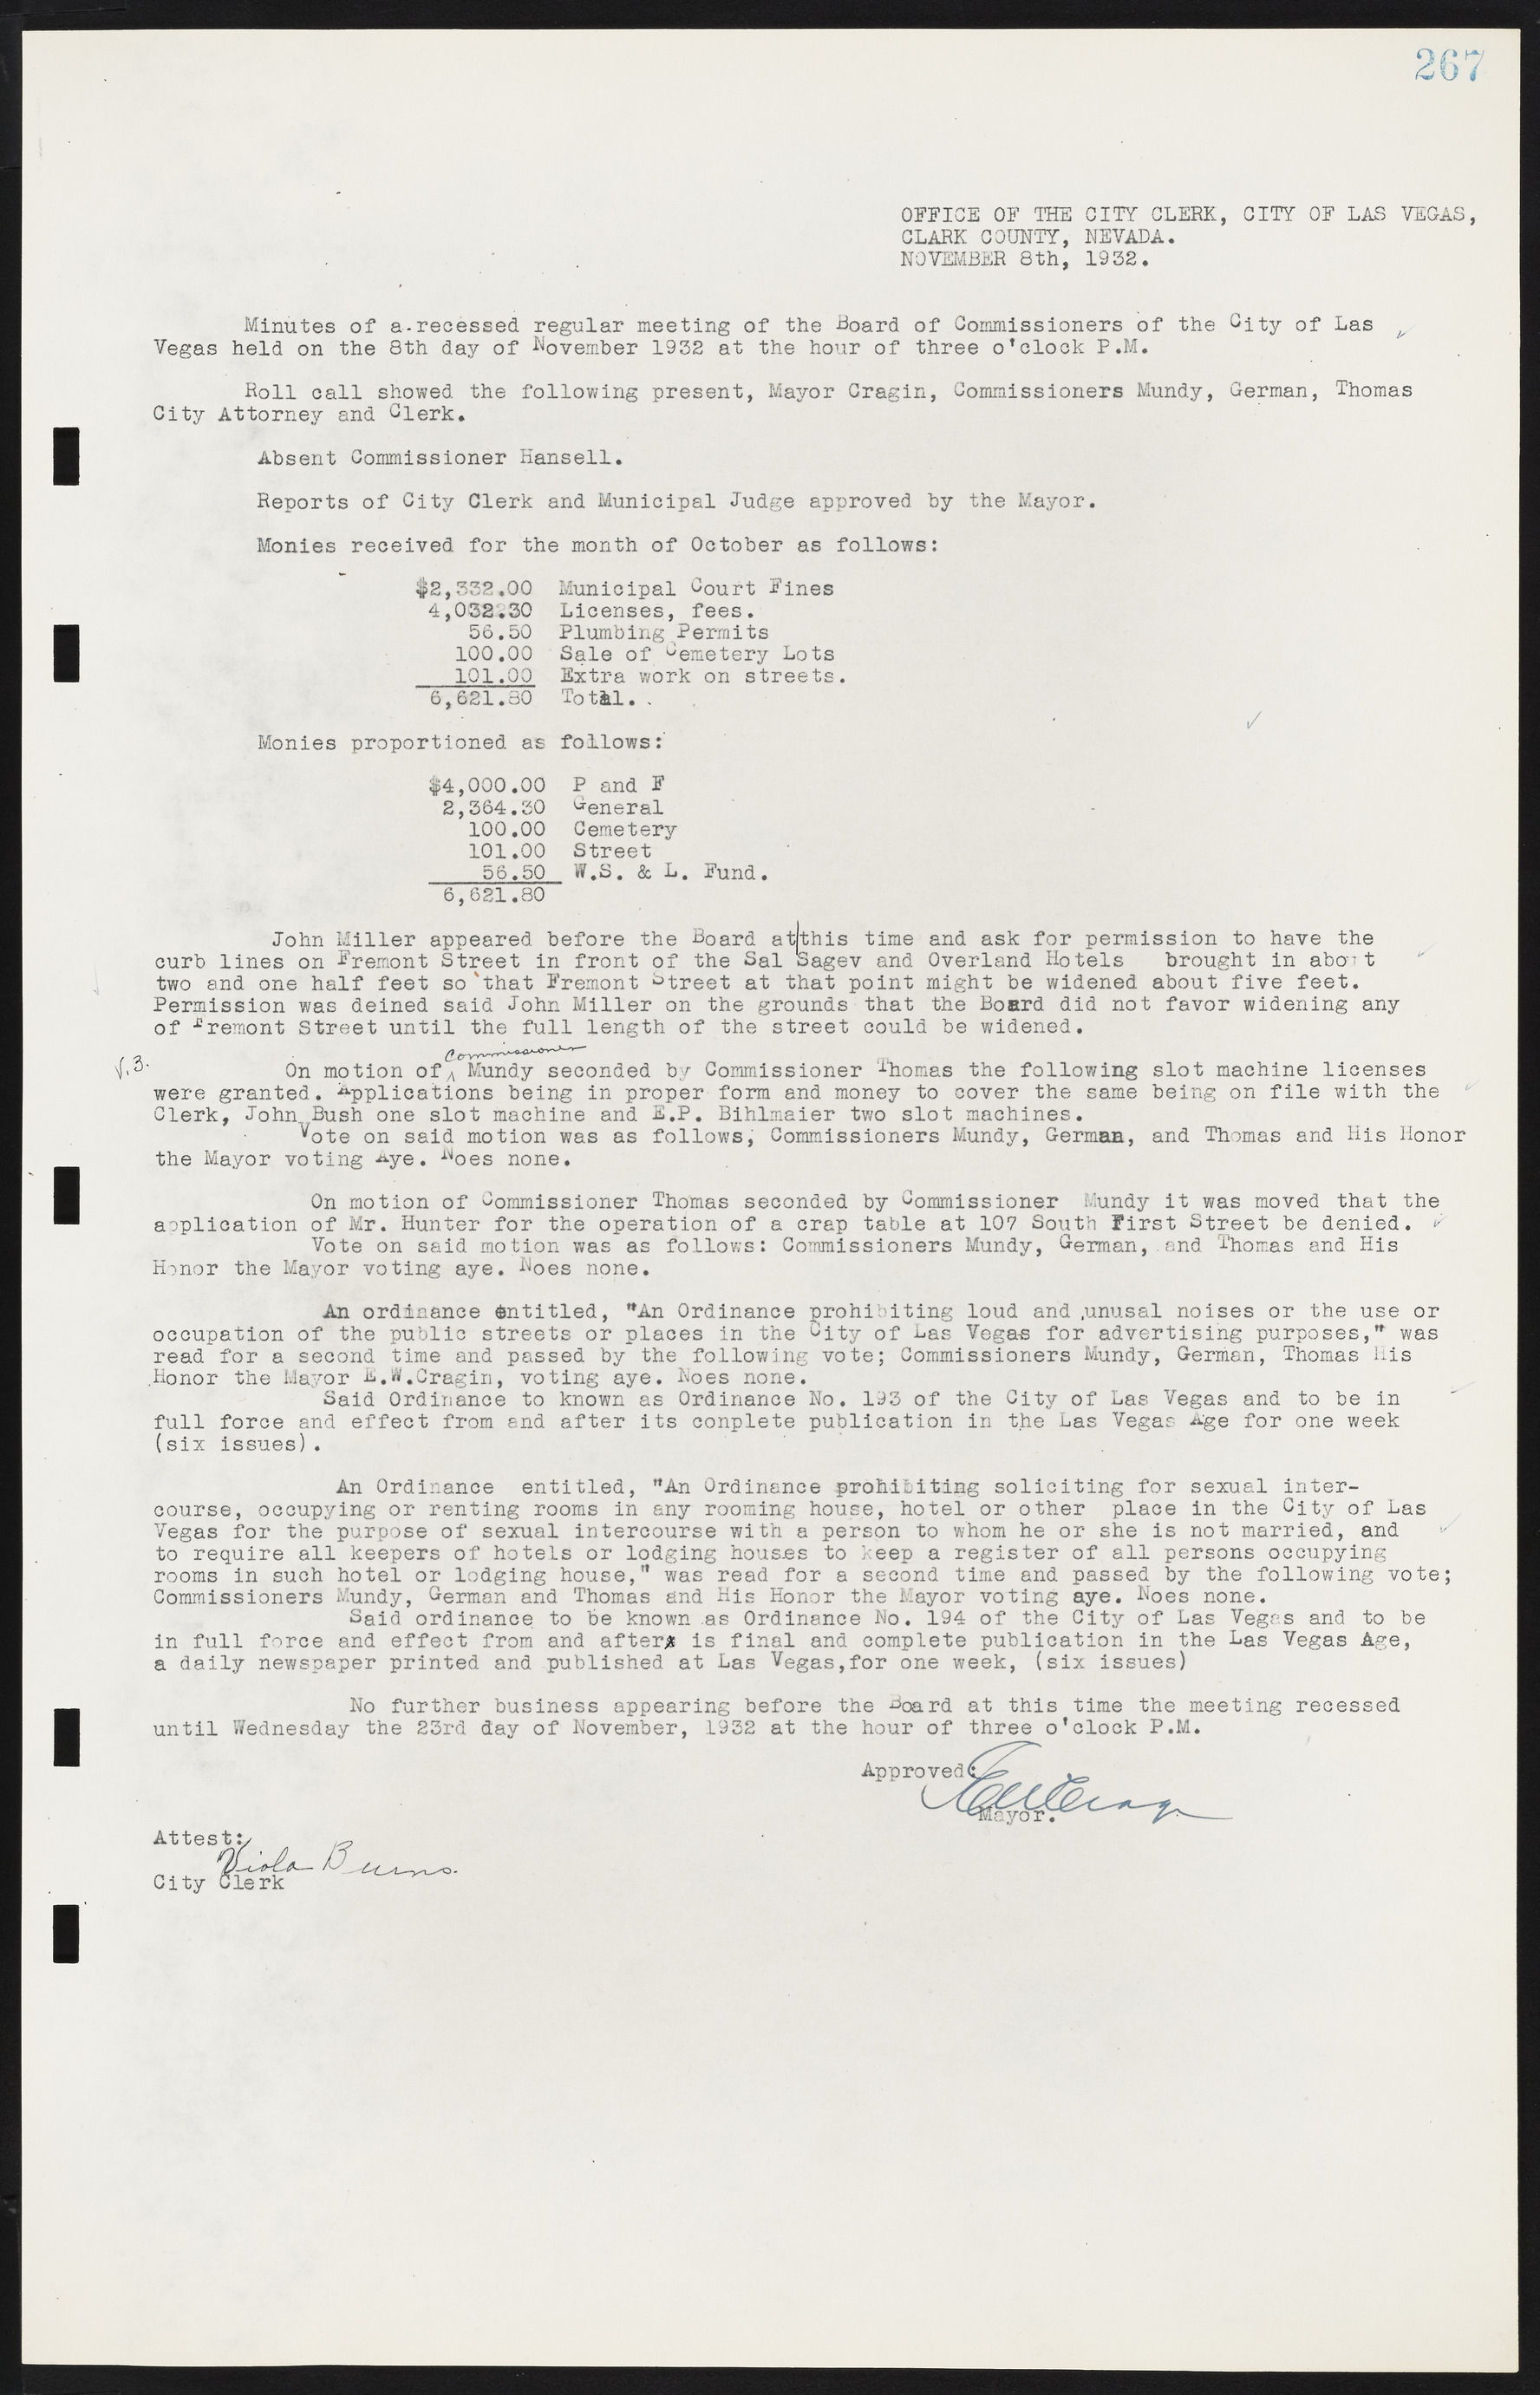 Las Vegas City Commission Minutes, May 14, 1929 to February 11, 1937, lvc000003-273